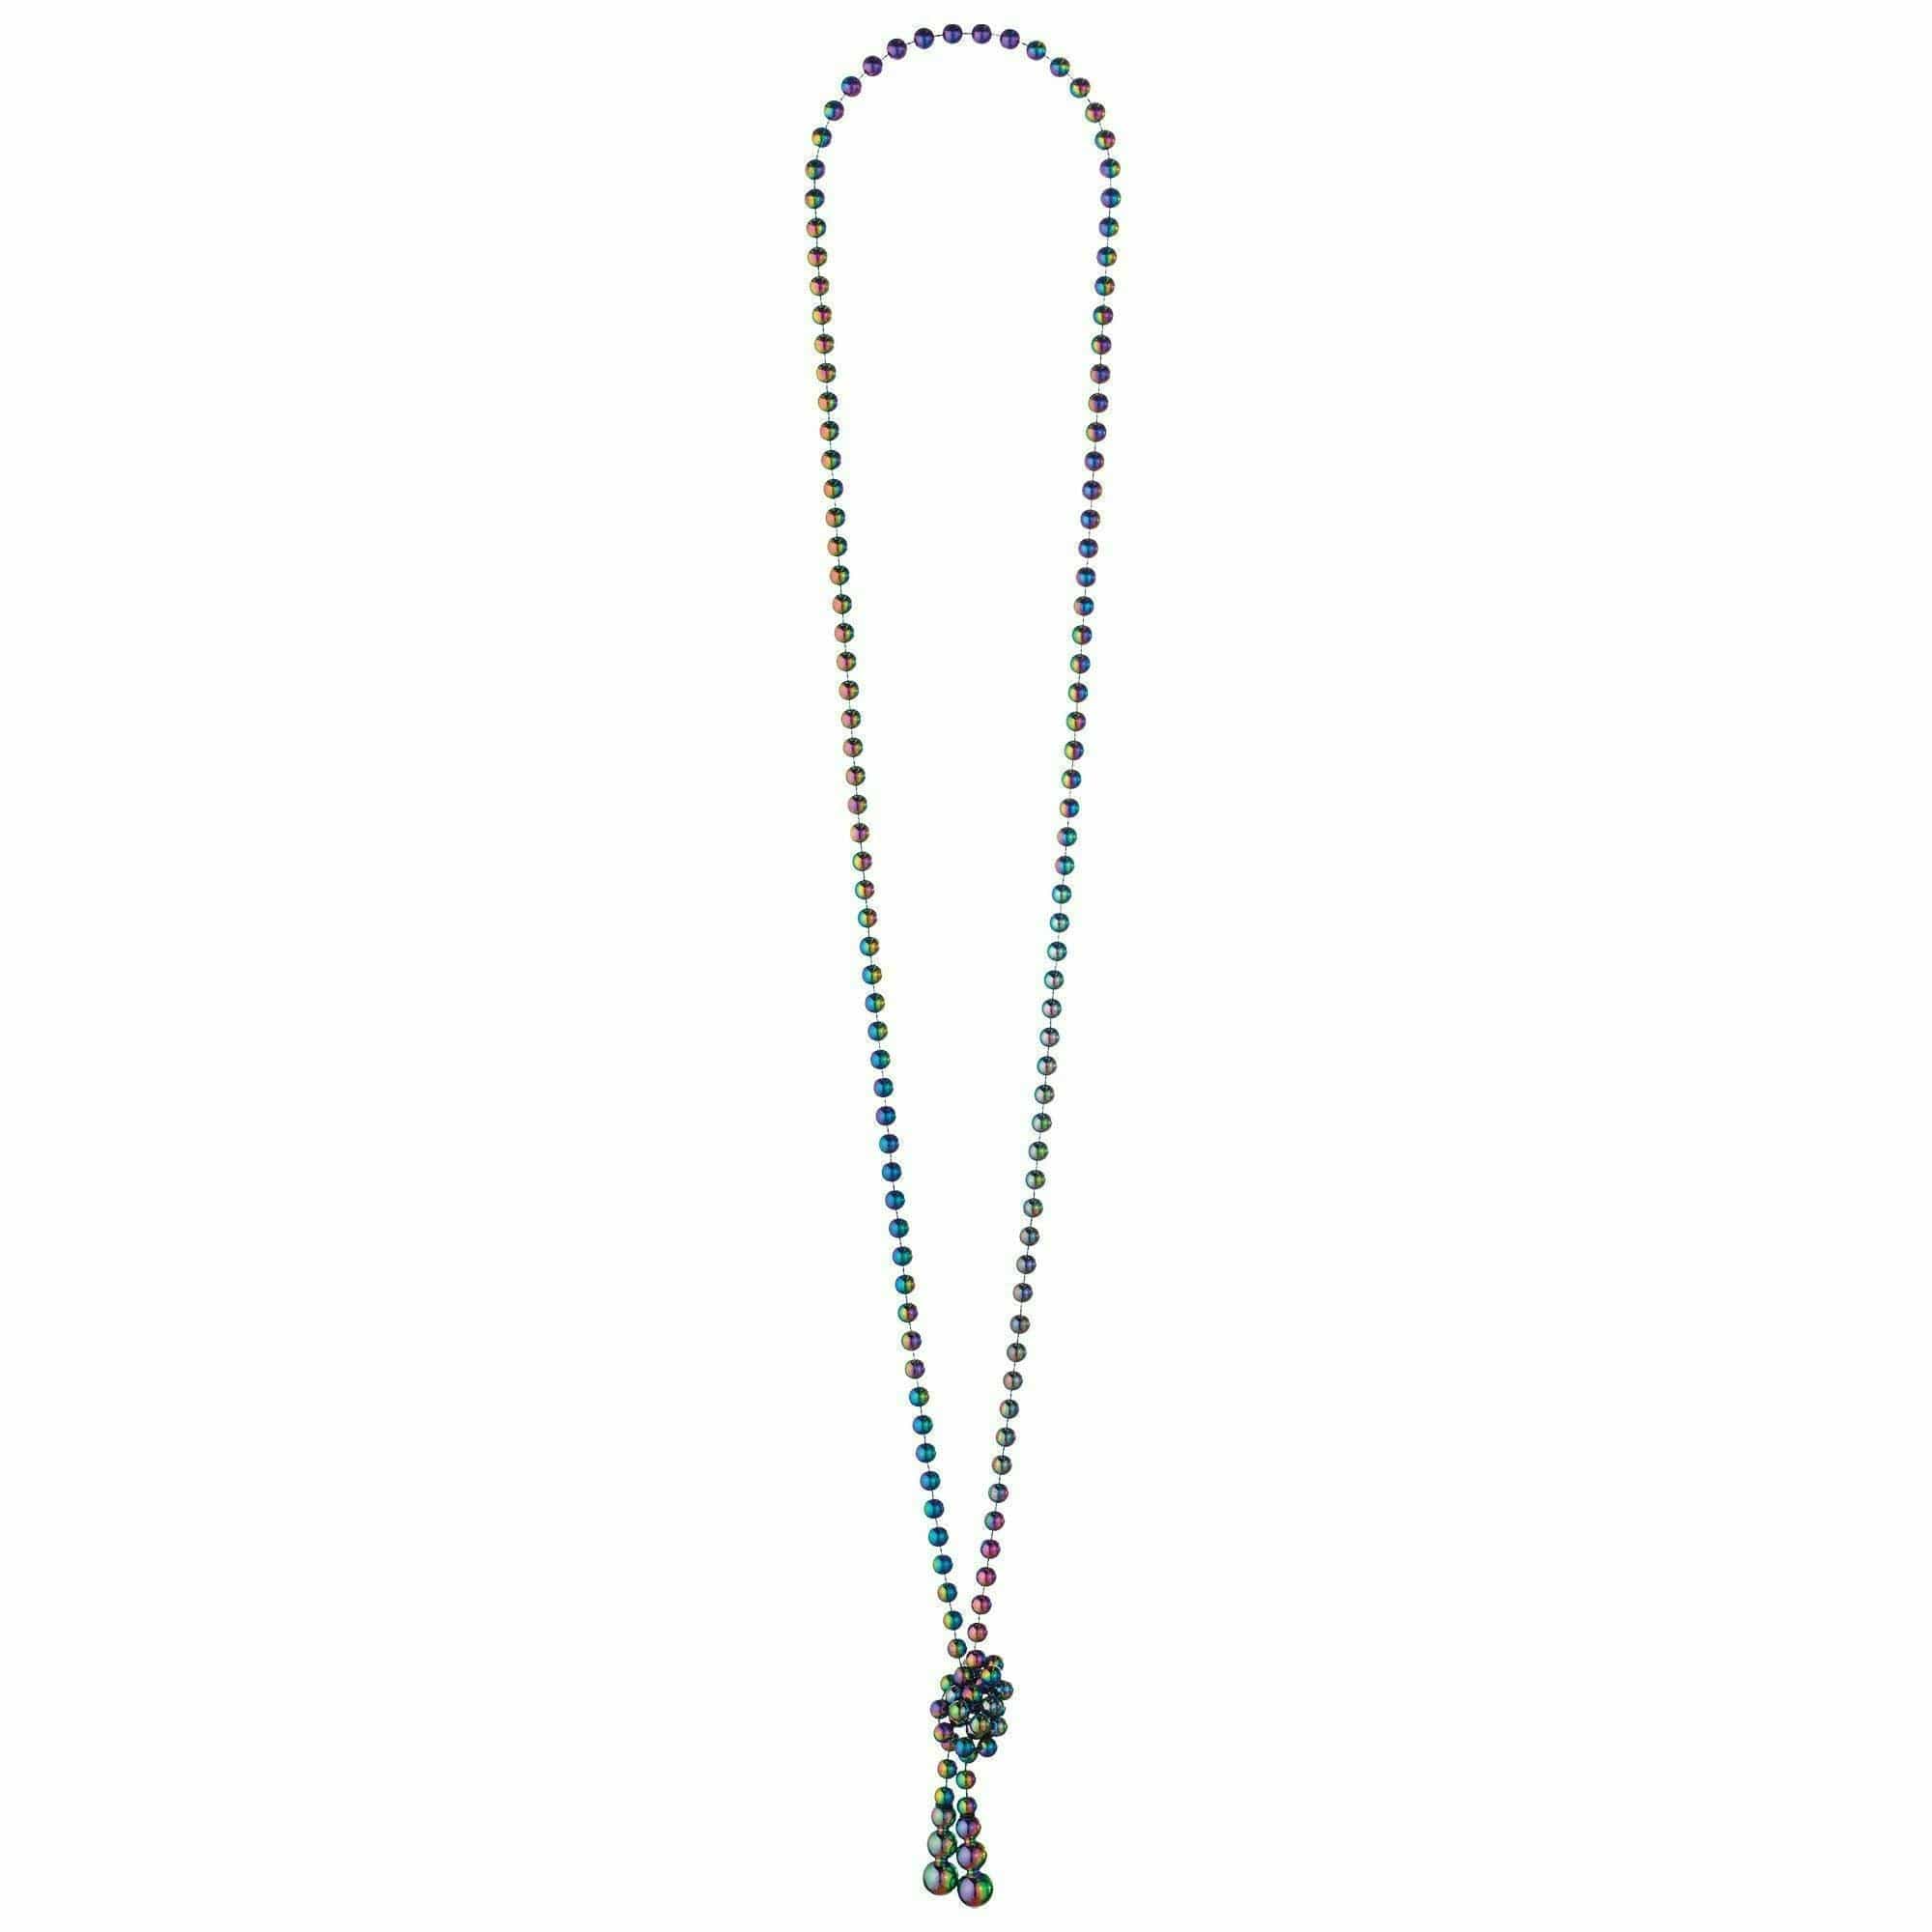 Amscan COSTUMES: ACCESSORIES Long Dark Faux Pearl Necklace